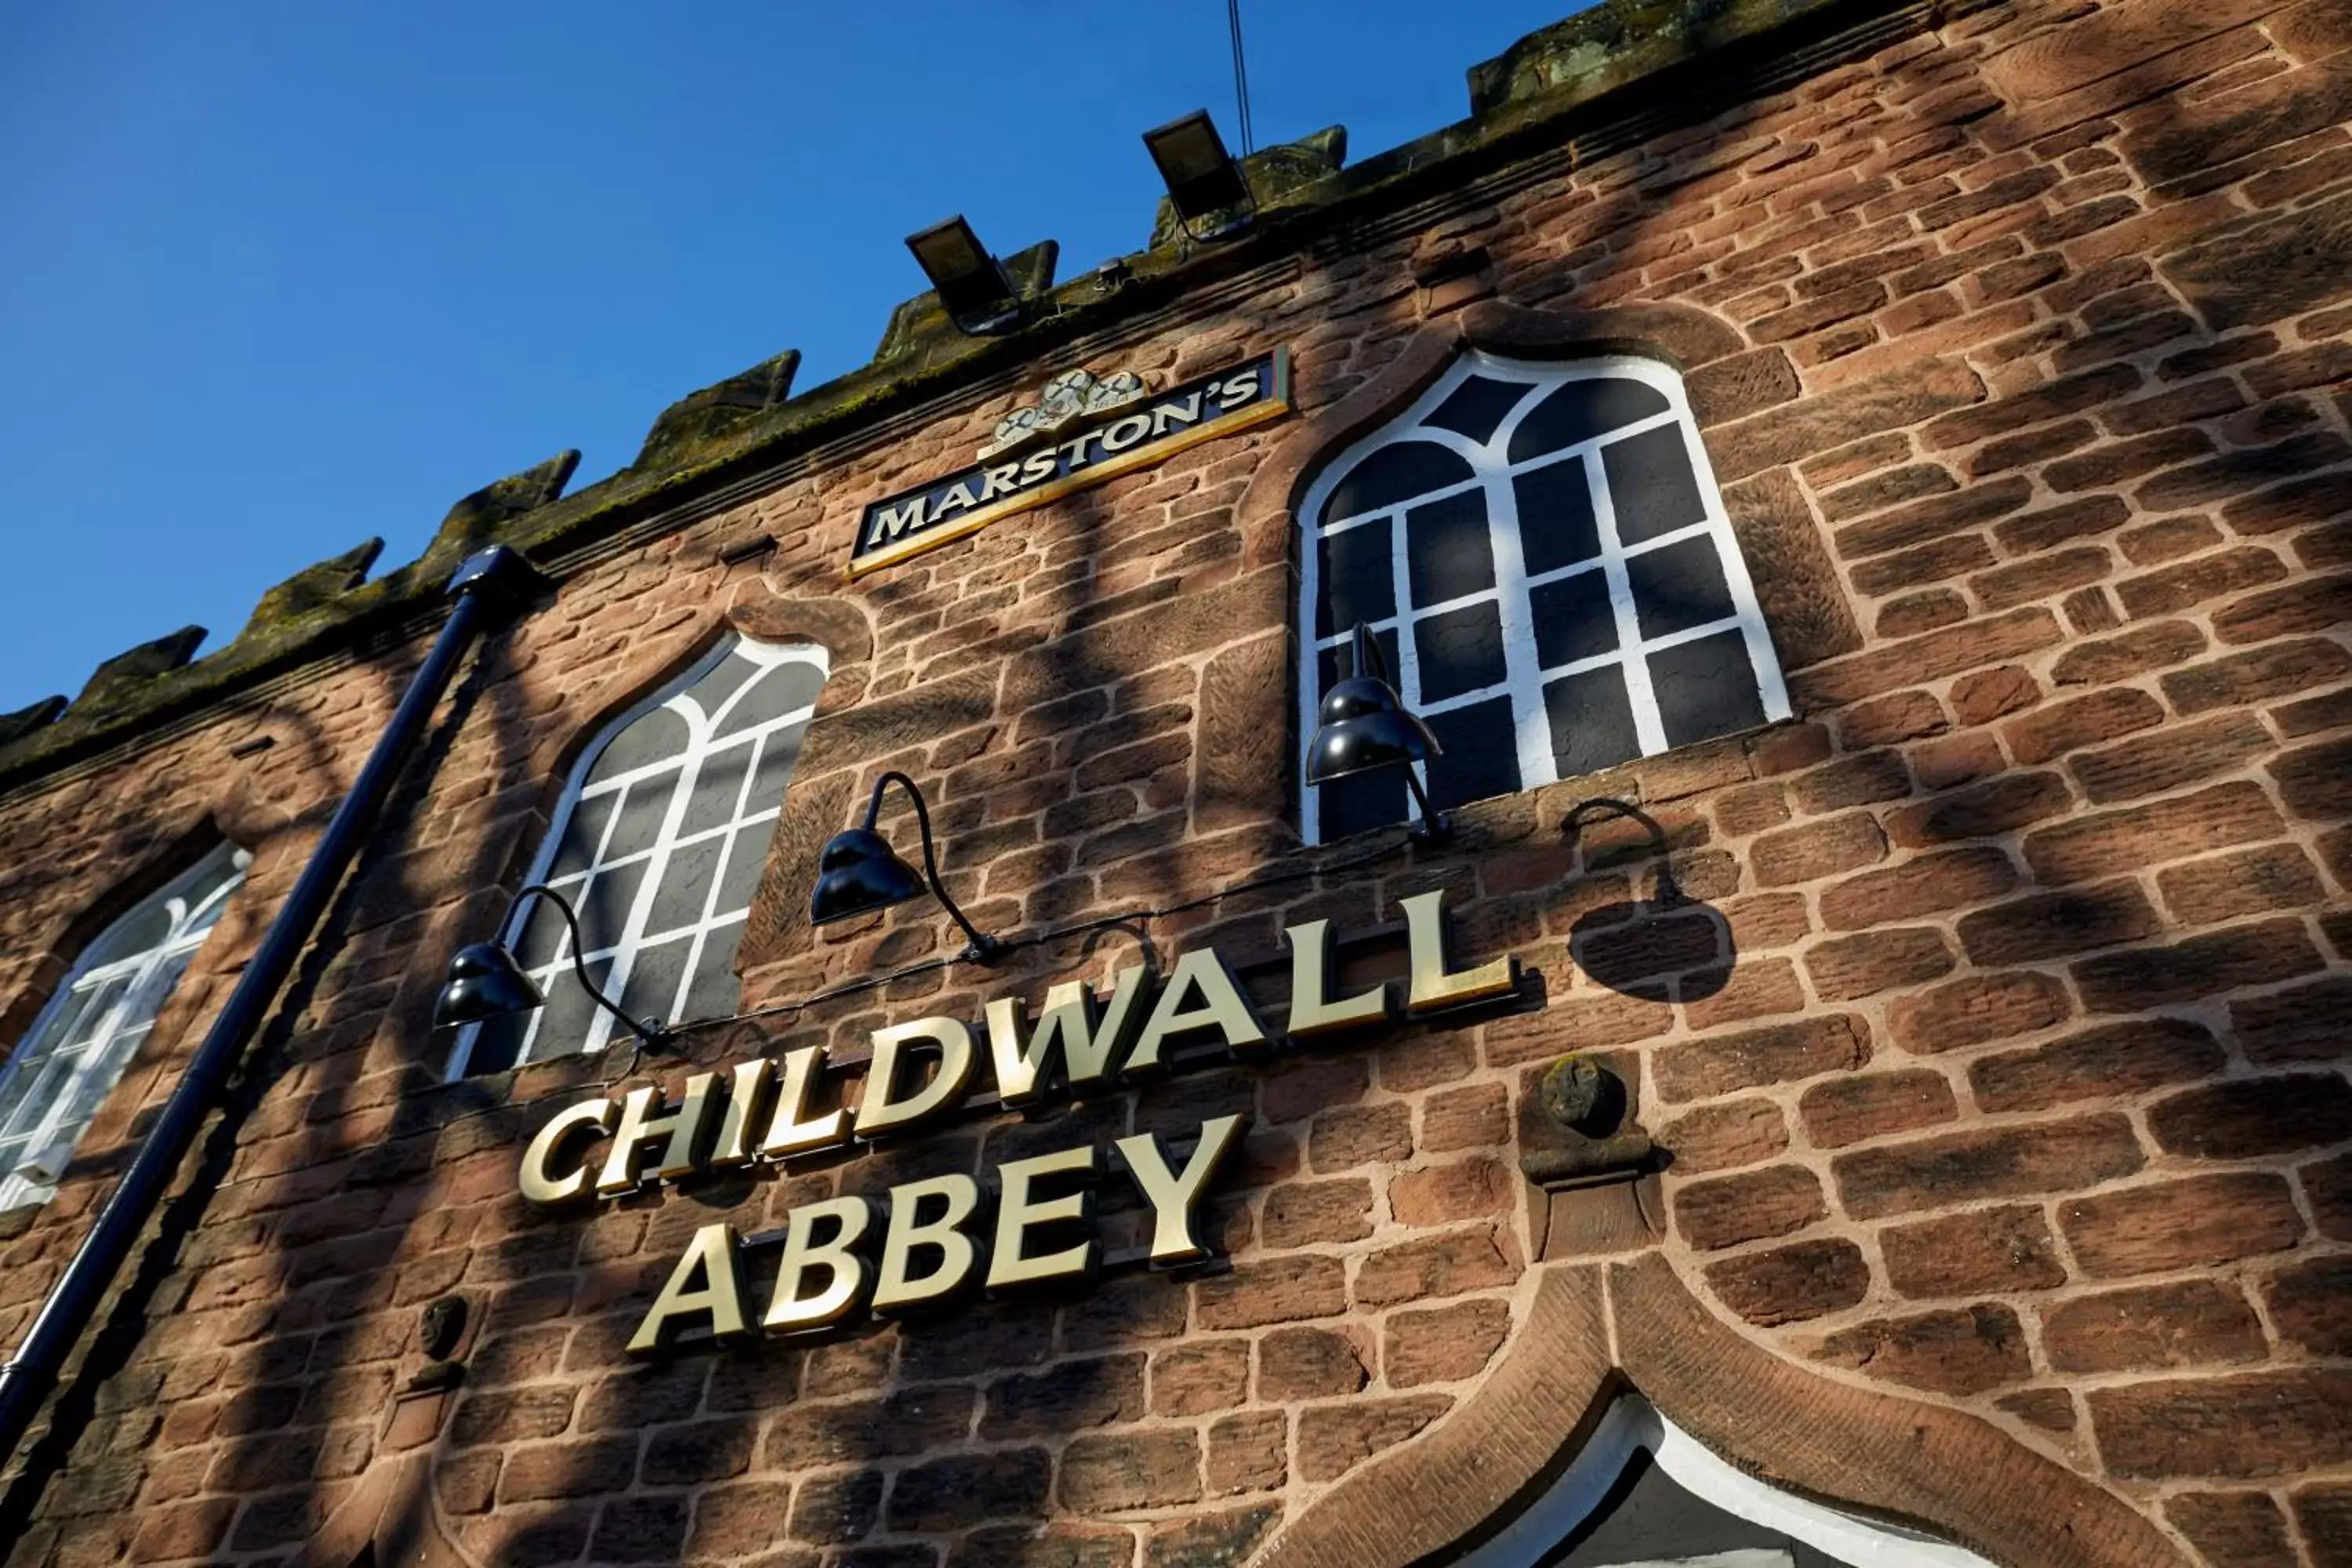 Property logo or sign, Property Building in Childwall Abbey, Liverpool by Marston's Inns